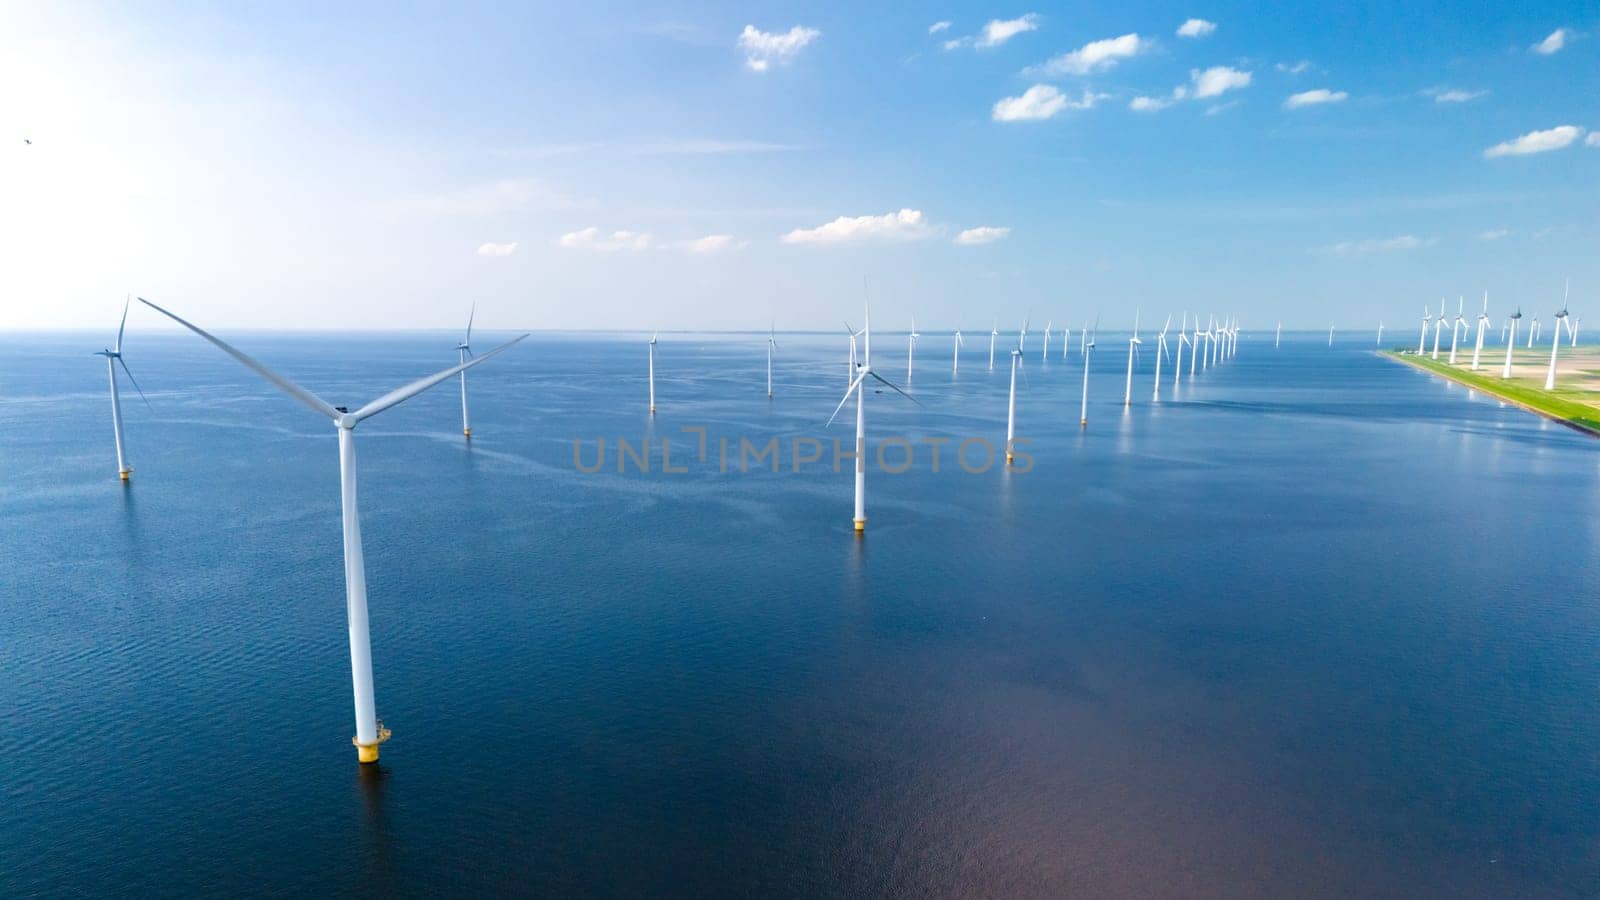 A serene large body of water is dotted with numerous windmills spinning gracefully in the wind, creating a mesmerizing and sustainable energy dance by fokkebok